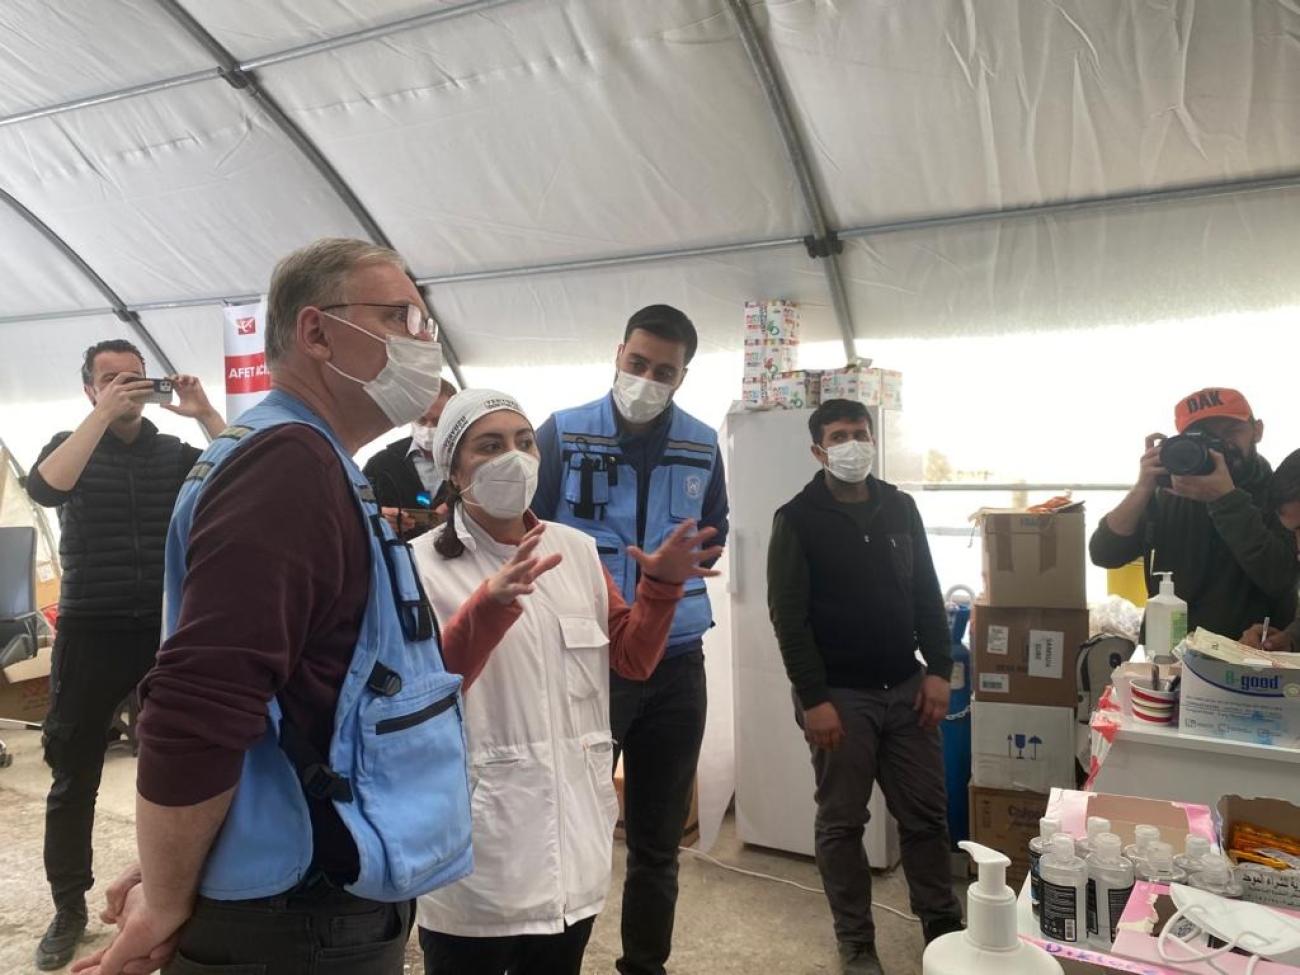 UN RC speaking to health personnel inside a health tent in the earthquake area